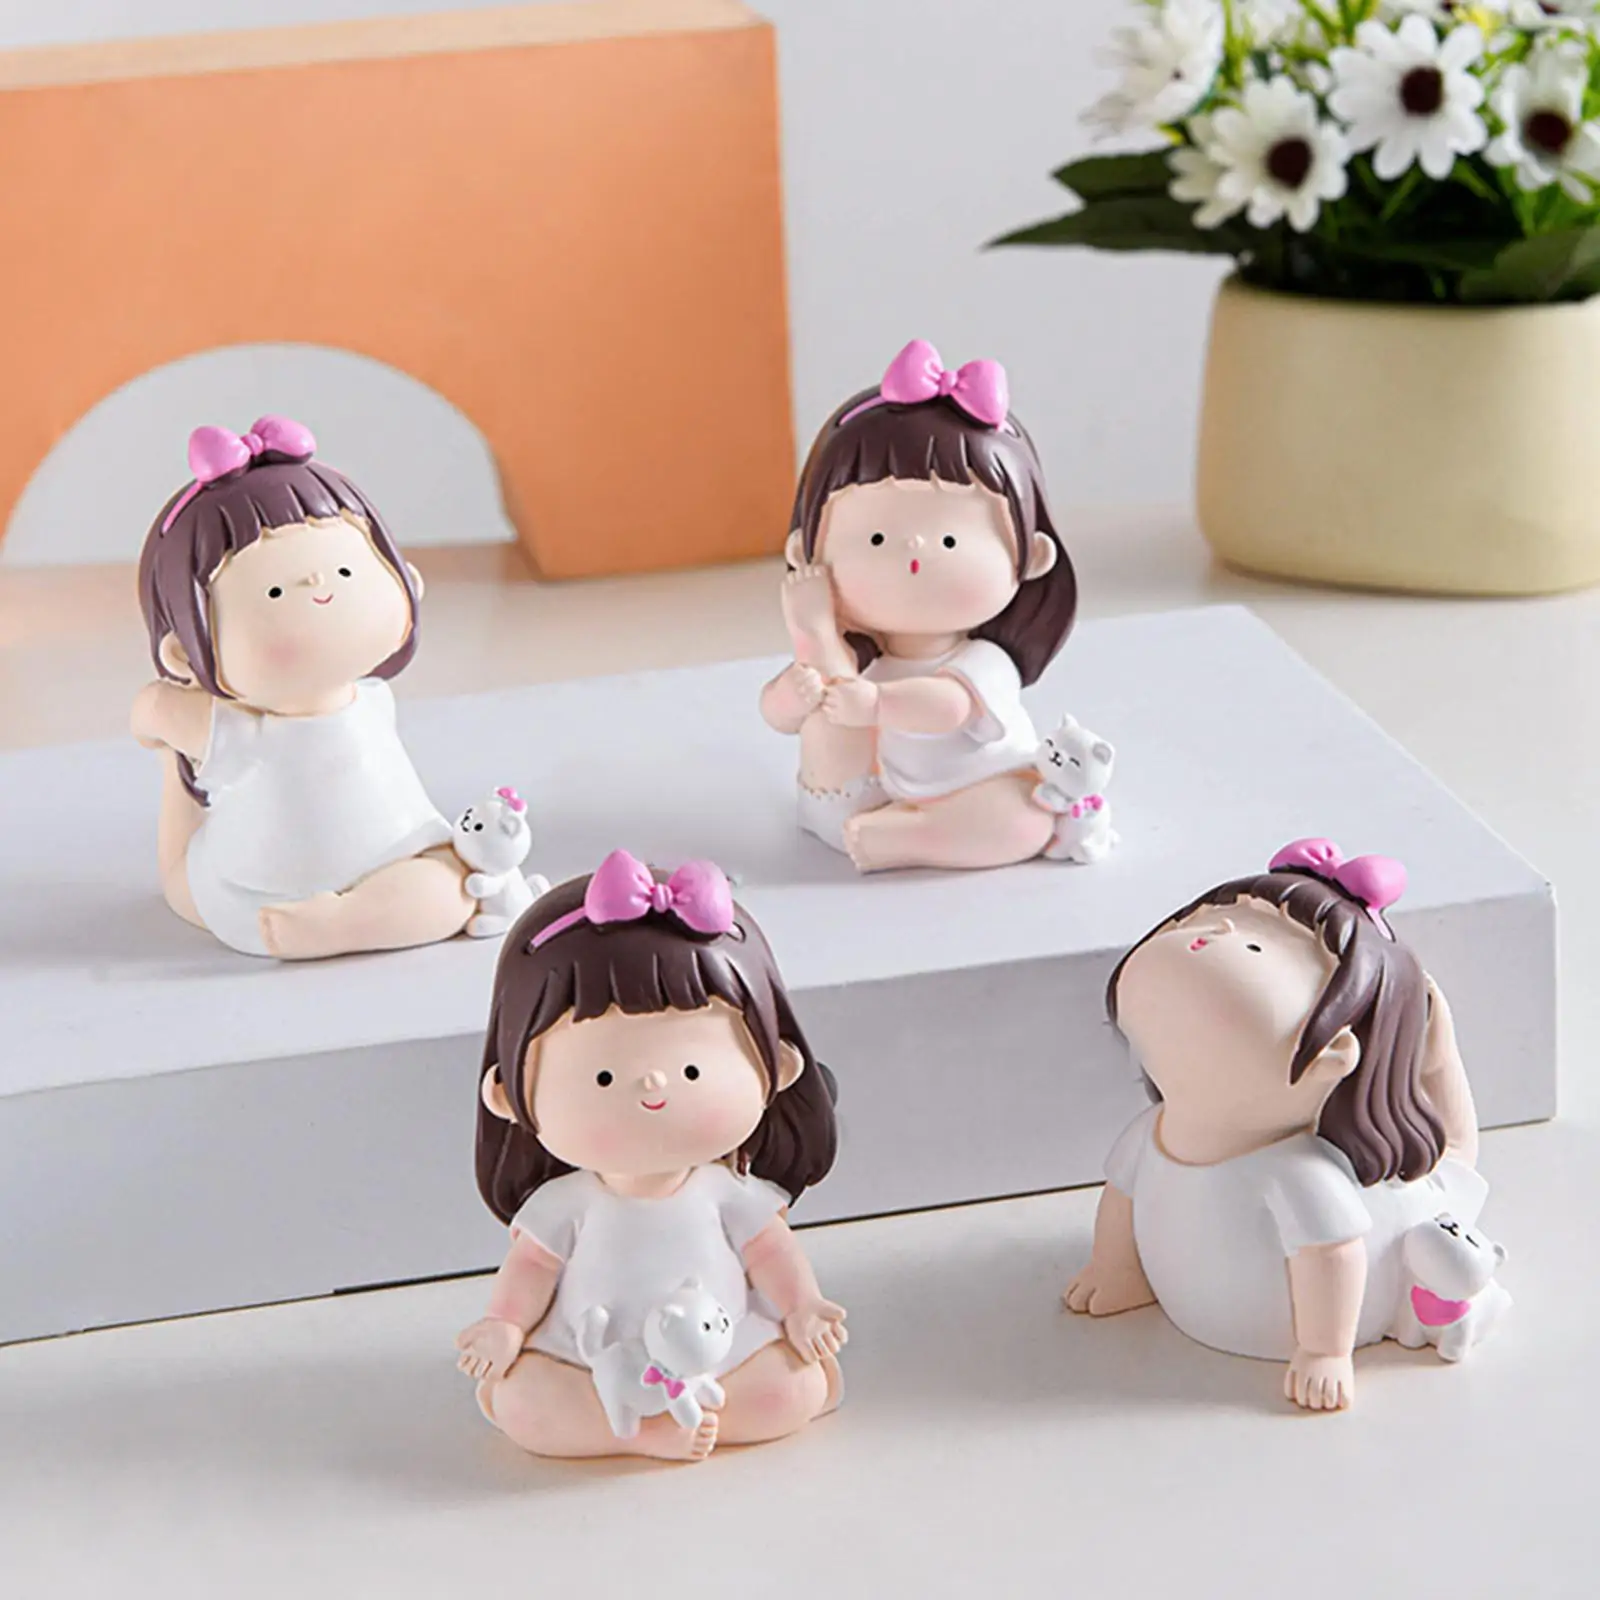 Lovely Girl Yoga Pose Statues Sculpture Resin Crafts Figurines Office Decors